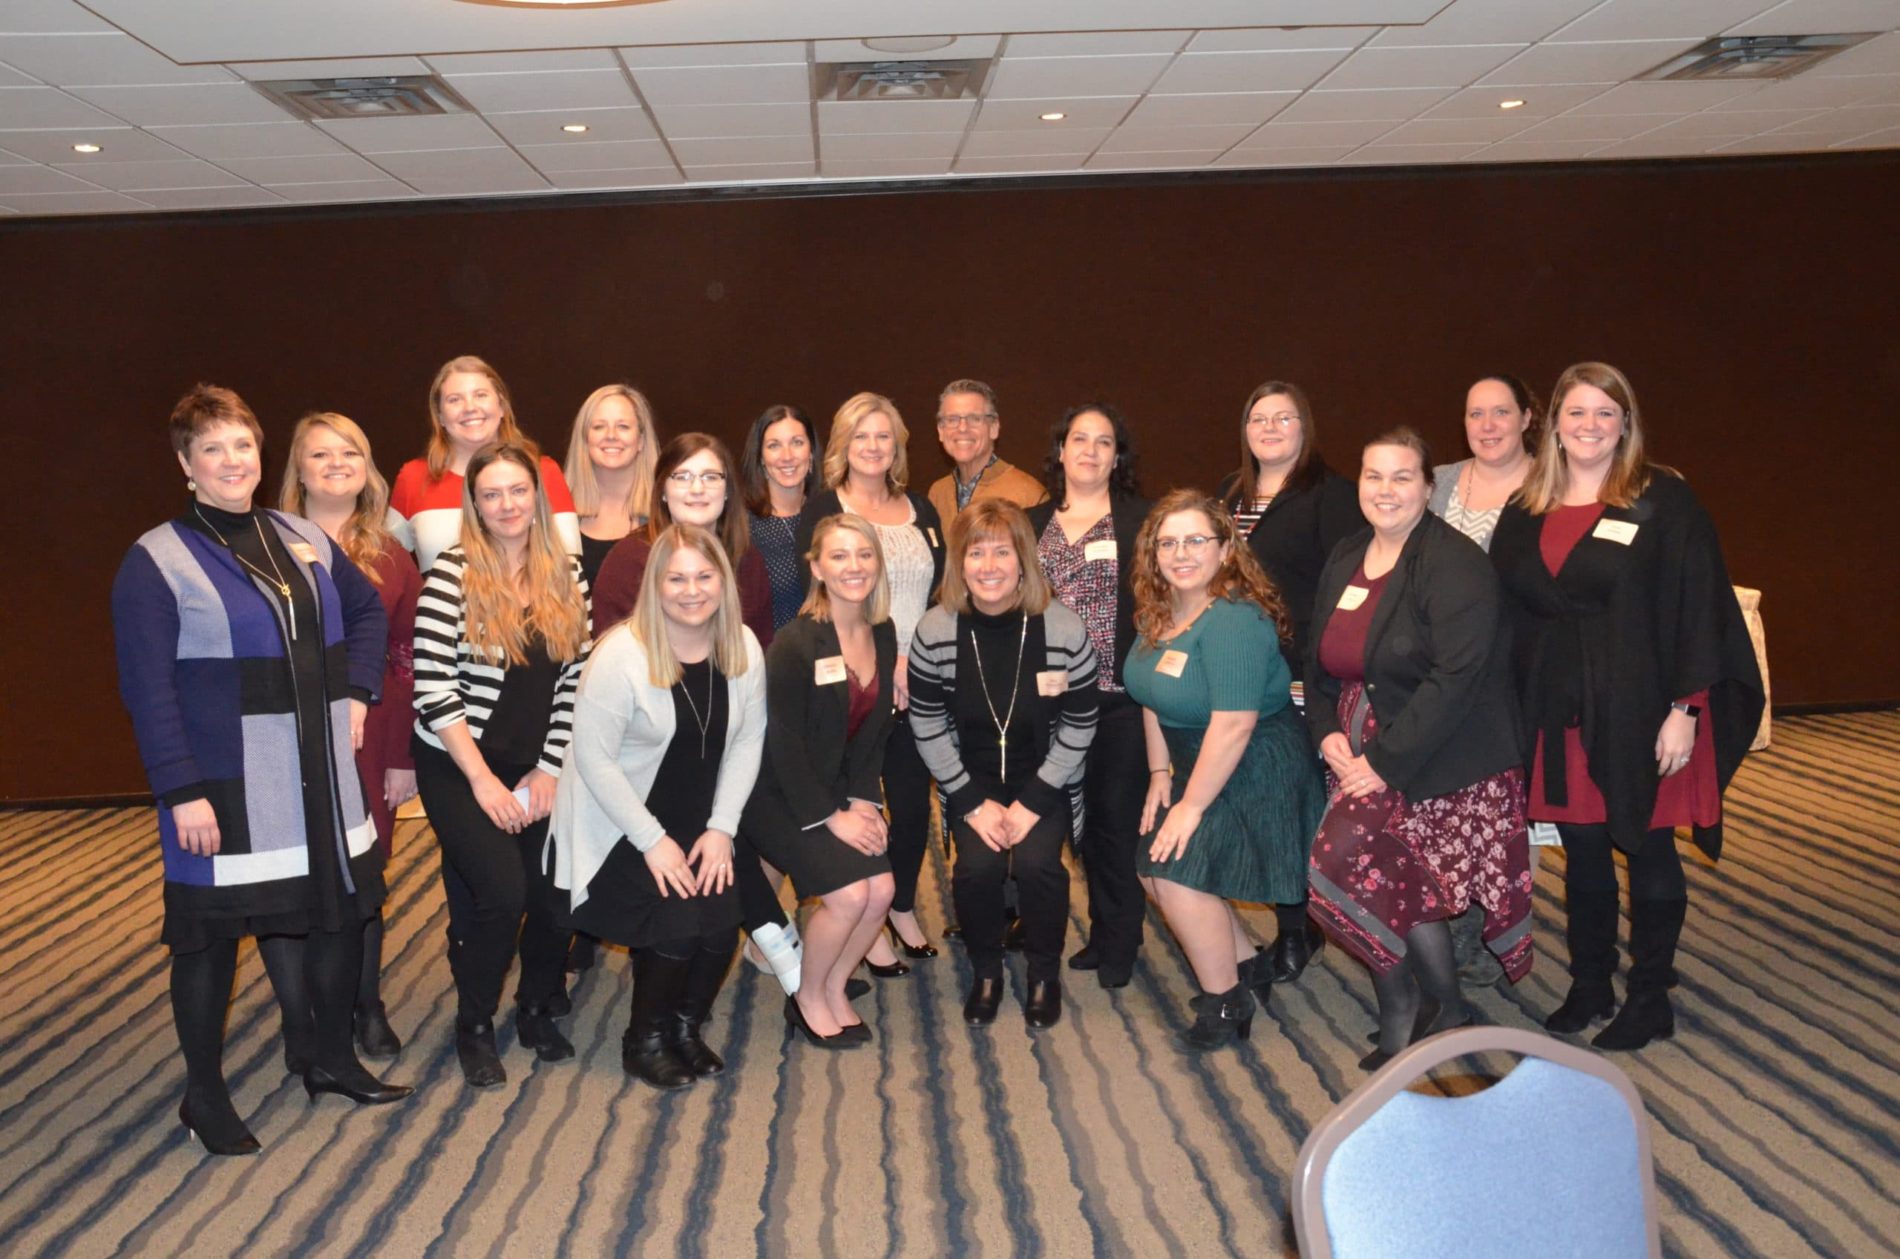 Doherty Employees Posing Together at Winter Party